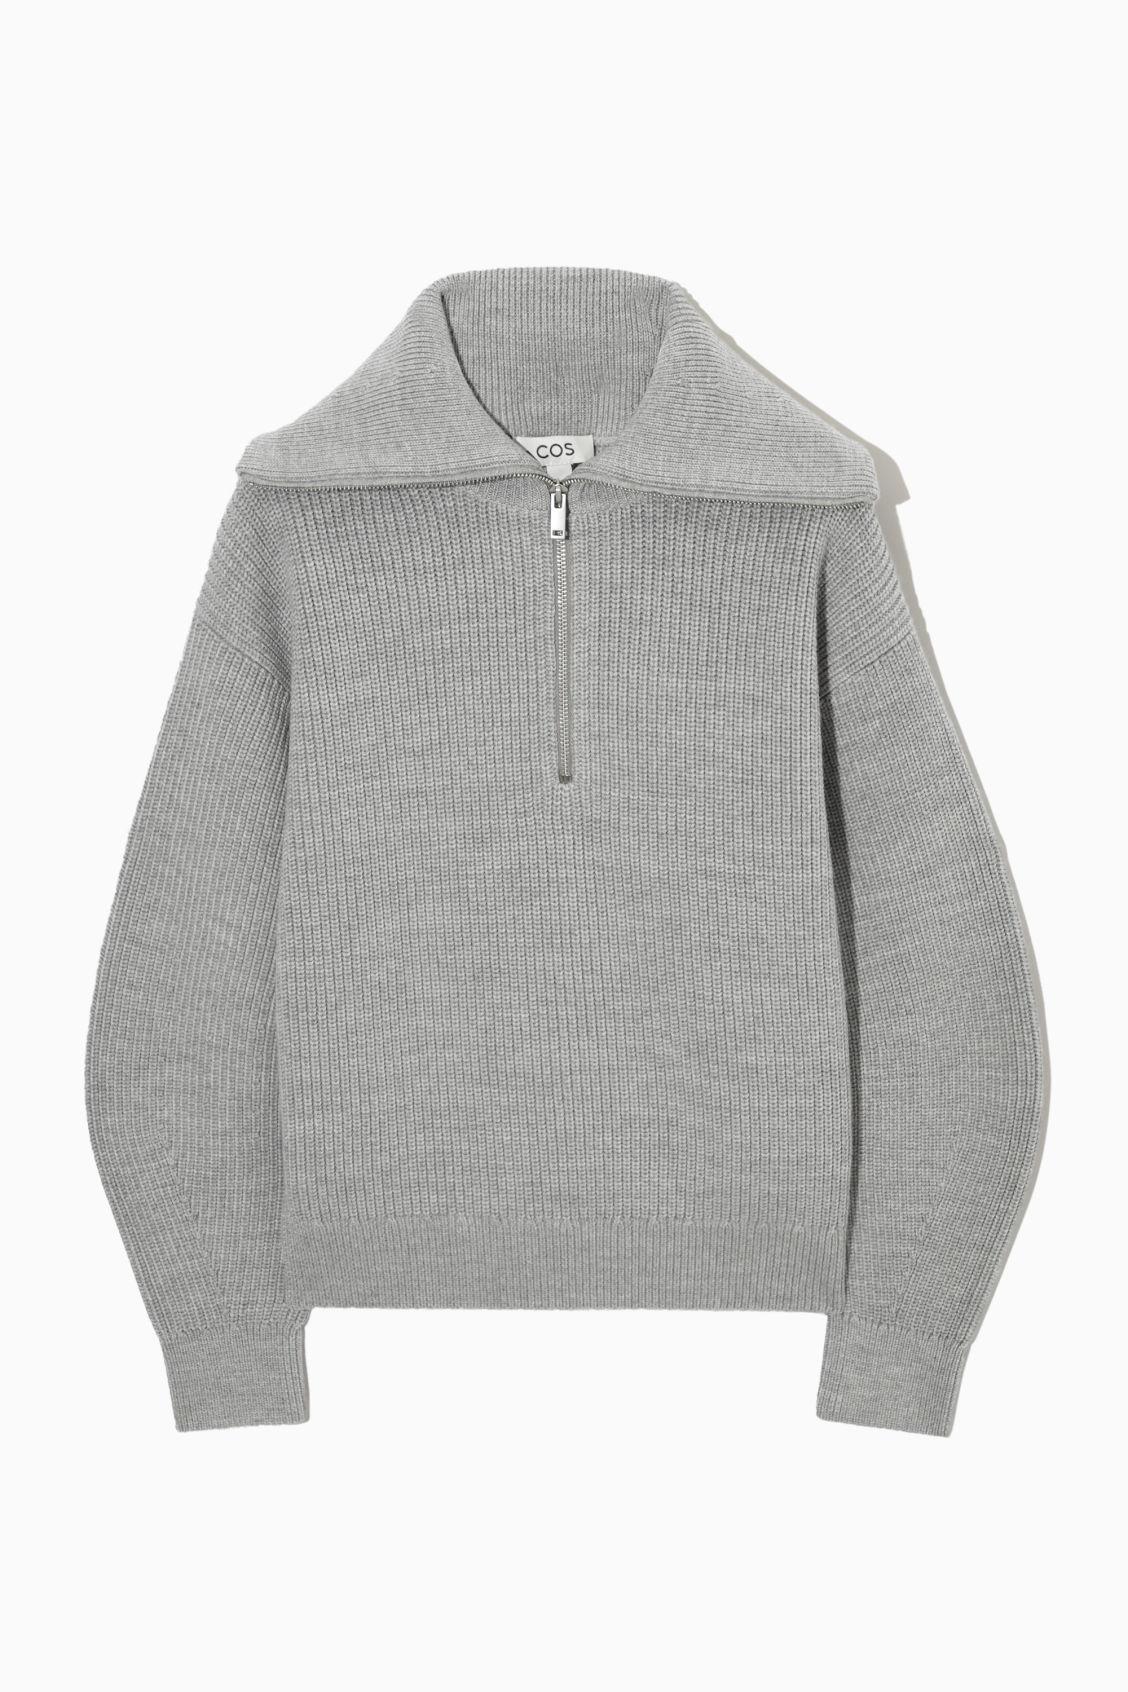 COS Wool And Cotton Half-zip Jumper in Gray | Lyst